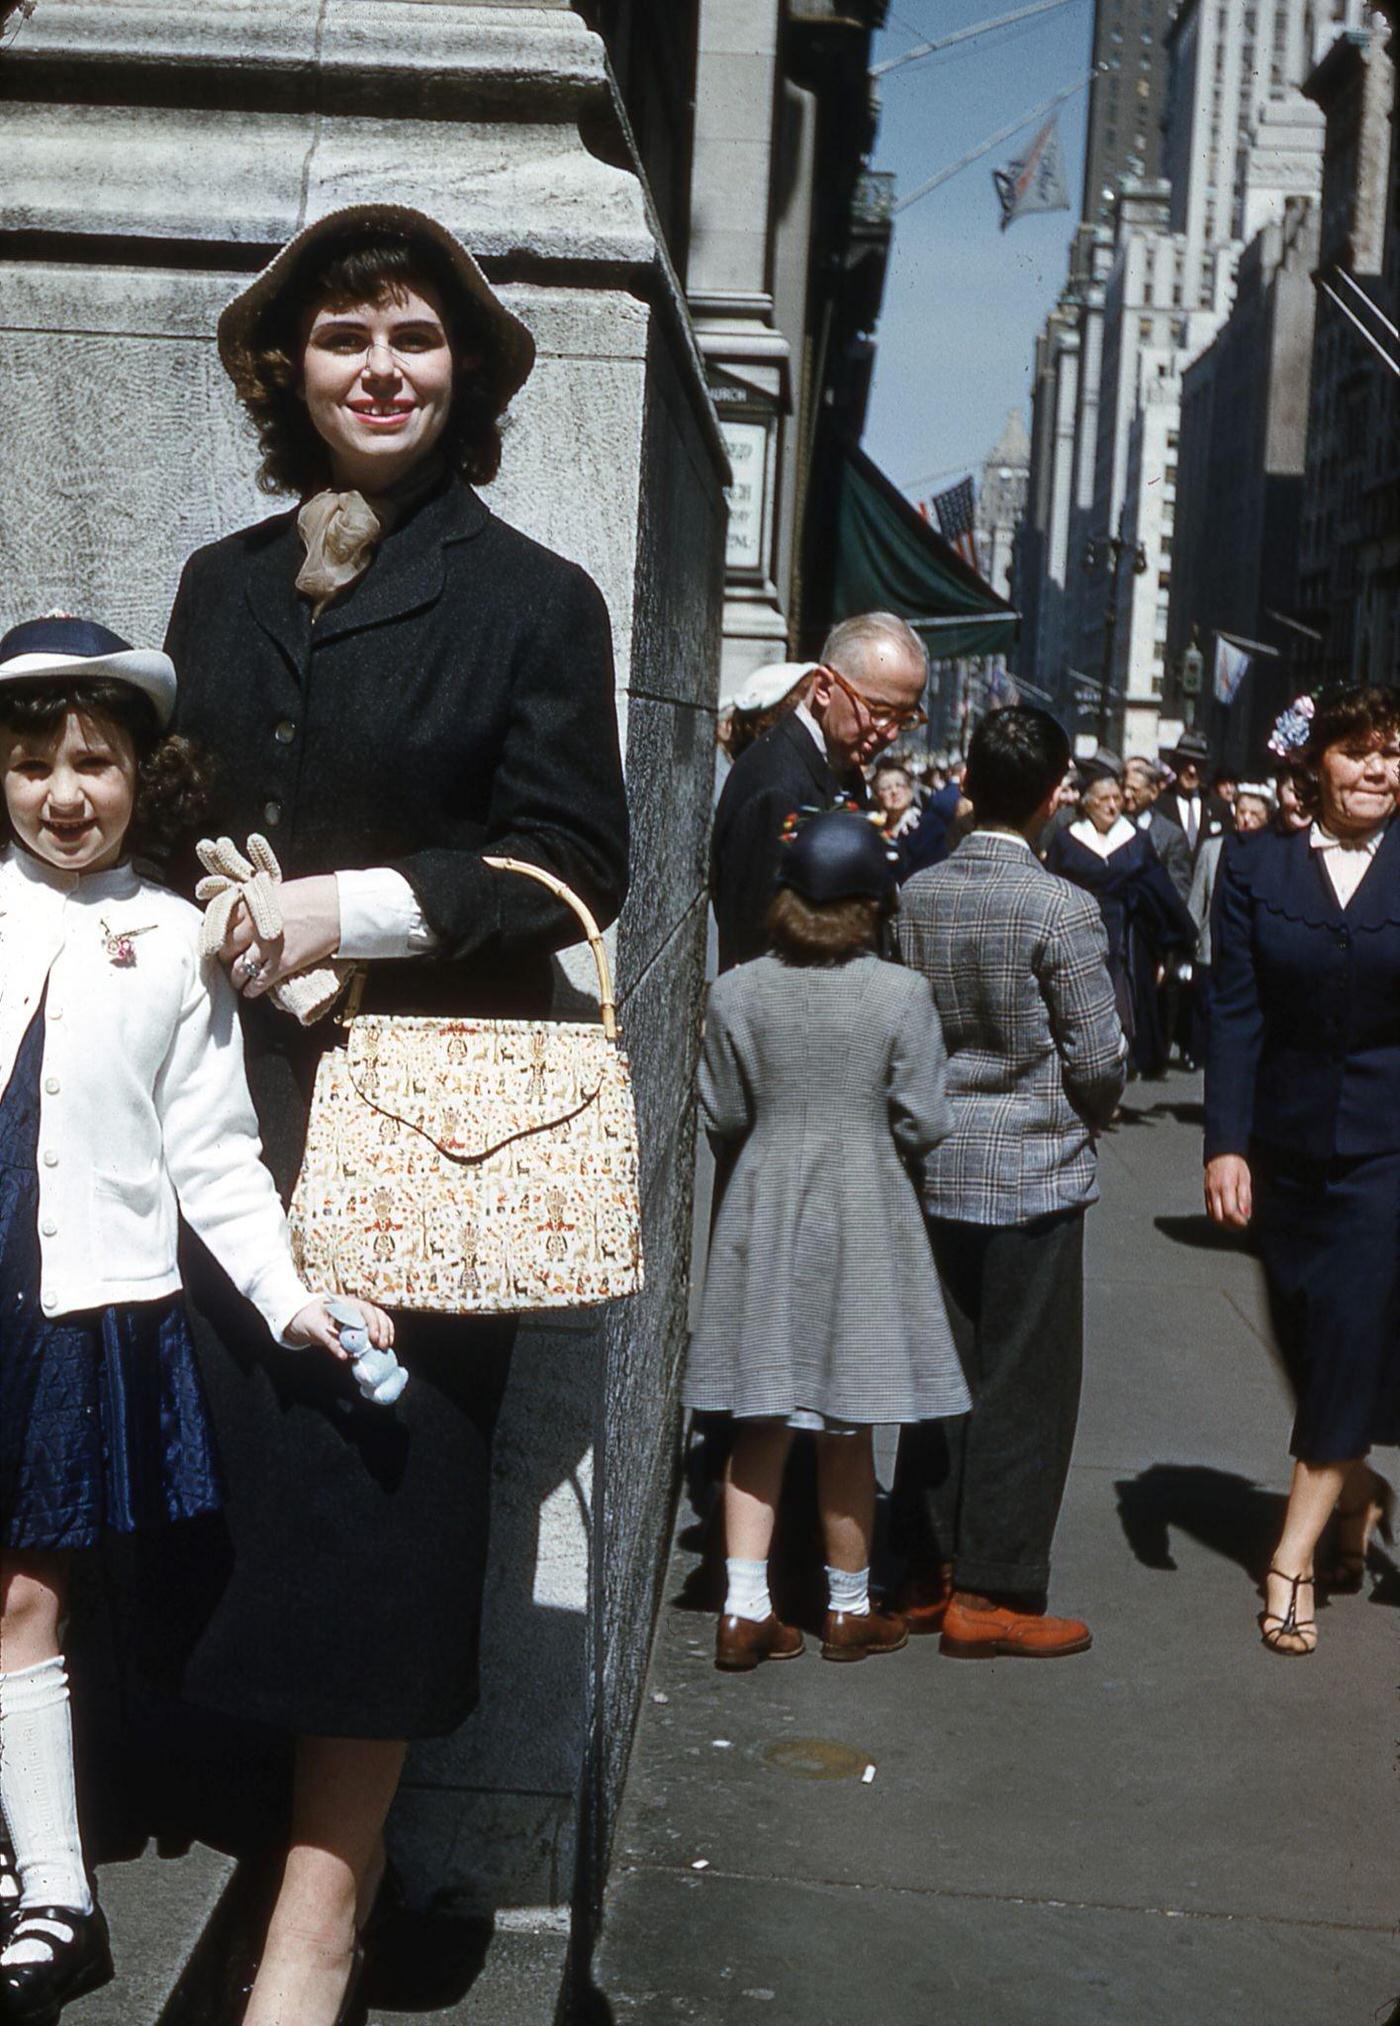 Woman And Child Posing In Front Of St Thomas Church At 5Th Avenue And 53Rd St, Manhattan, 1955.